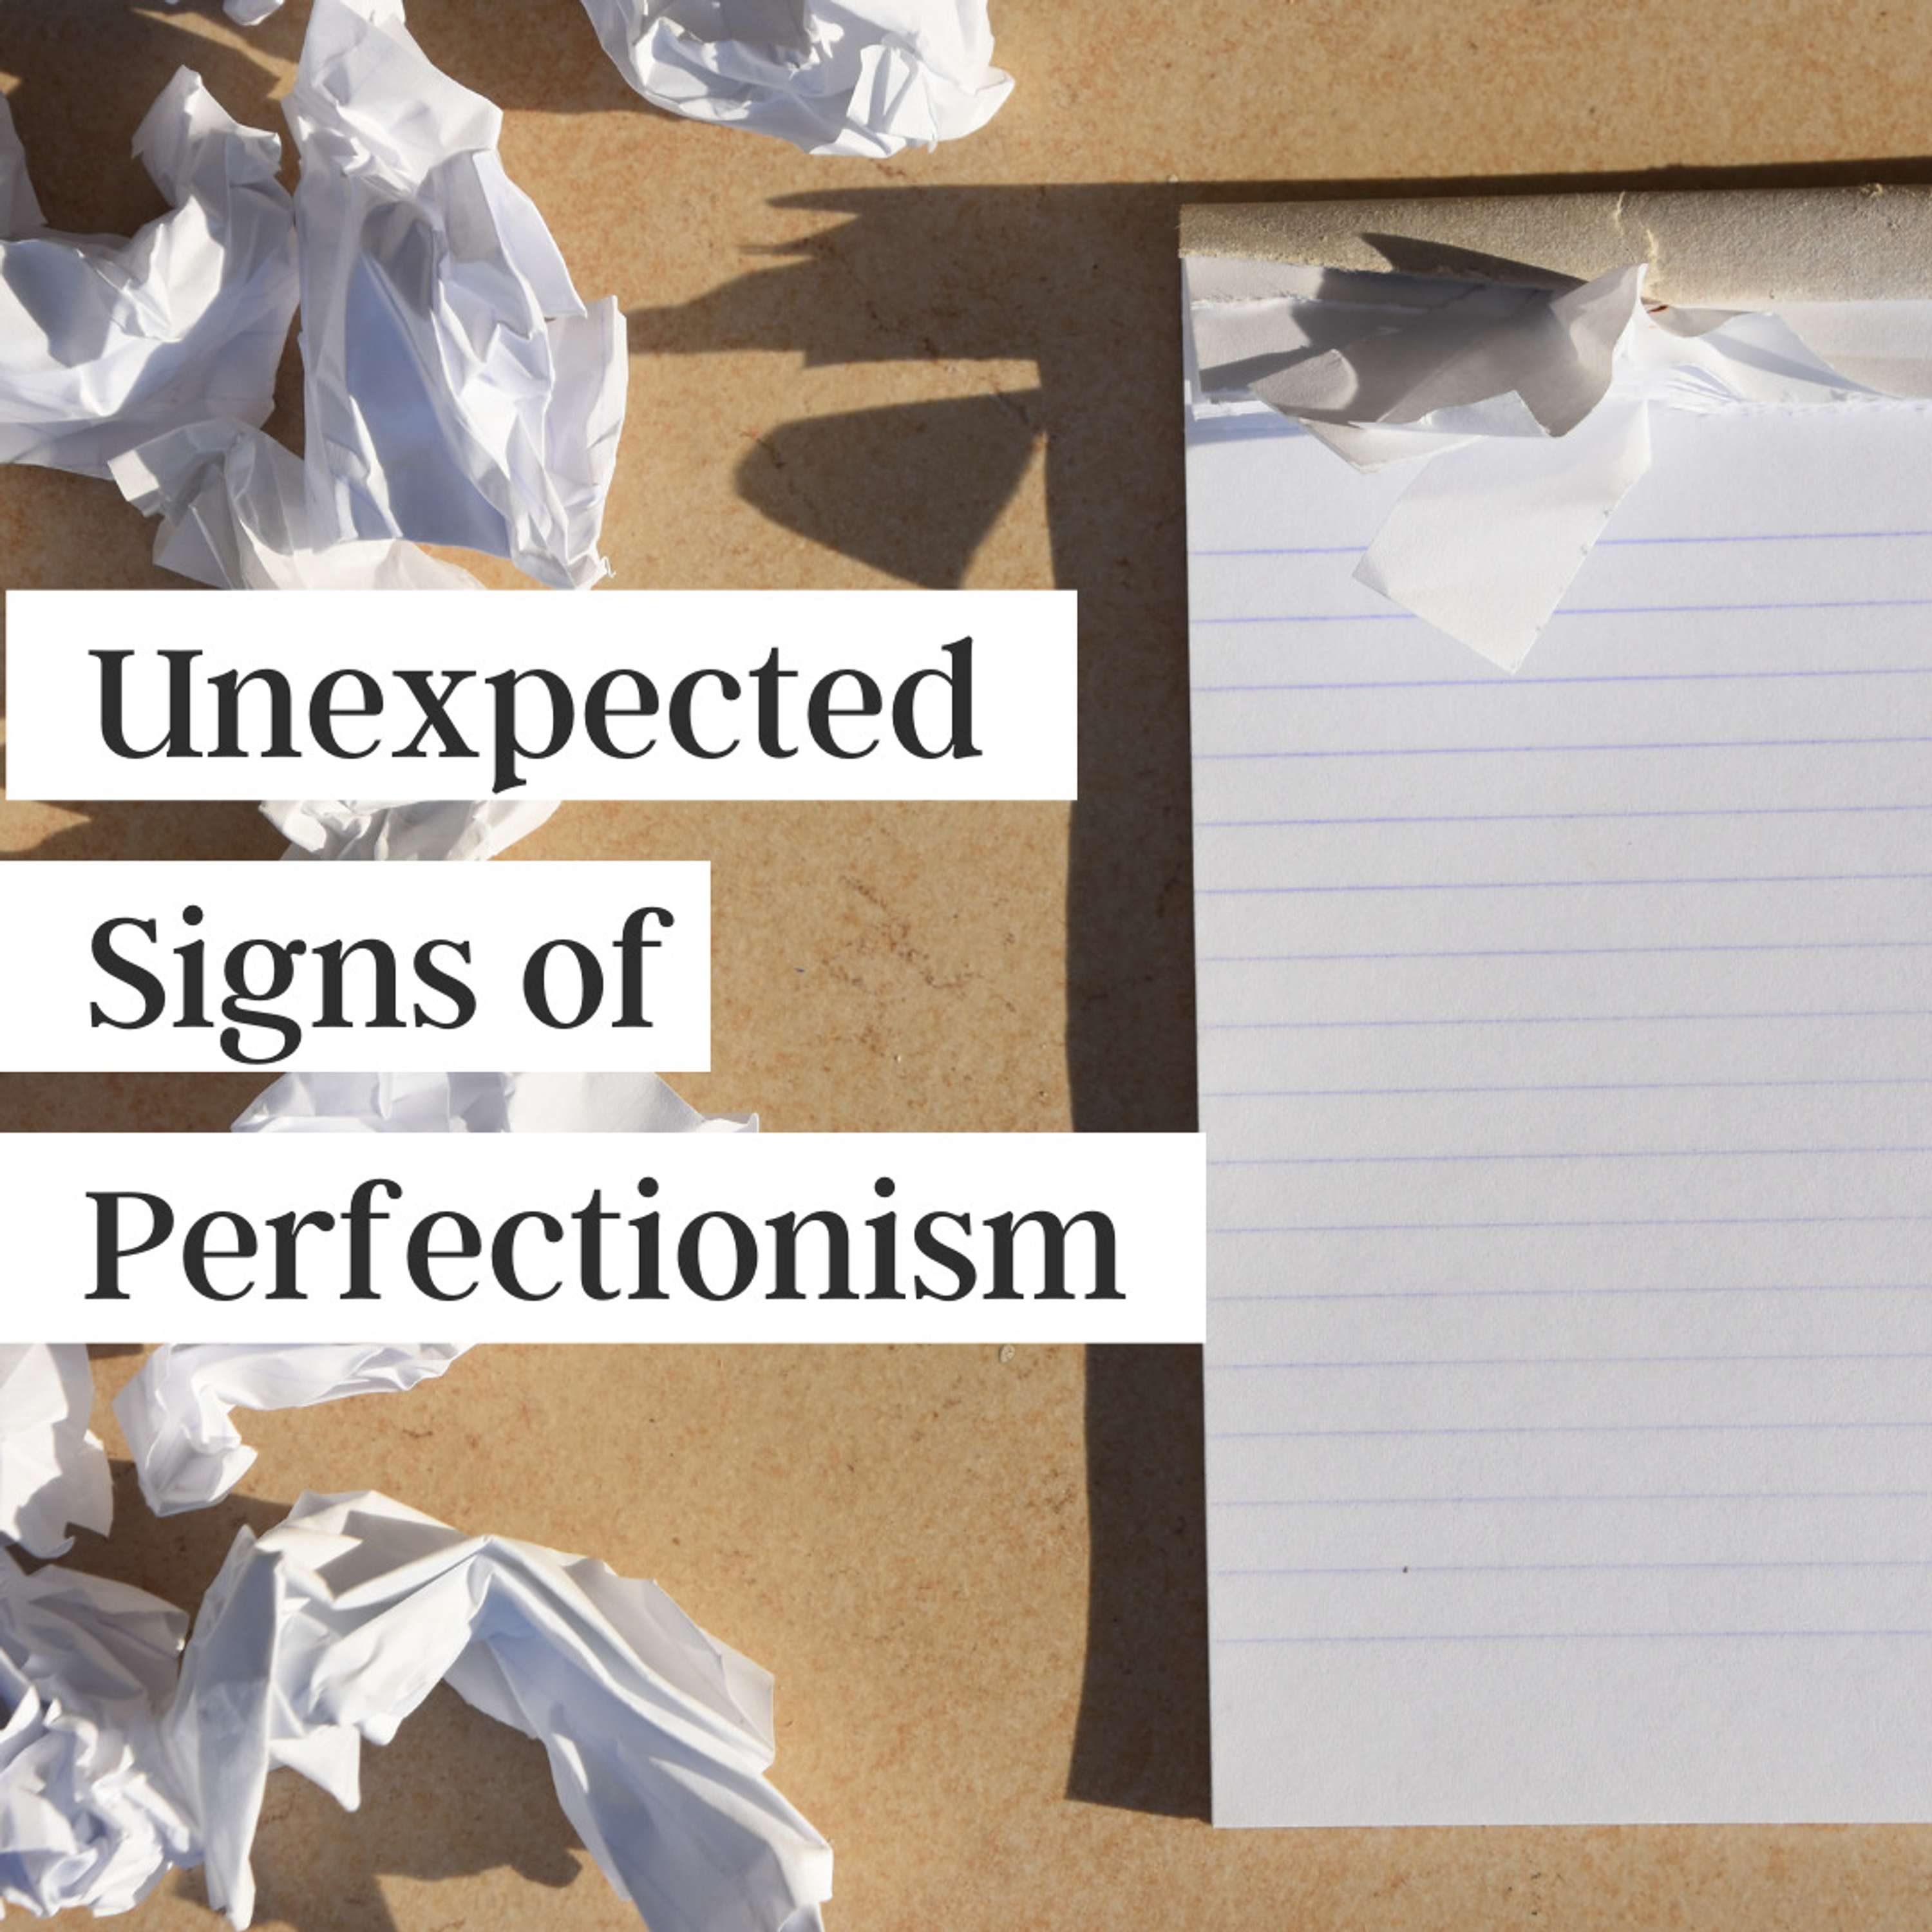 10 Unexpected Signs of Perfectionism